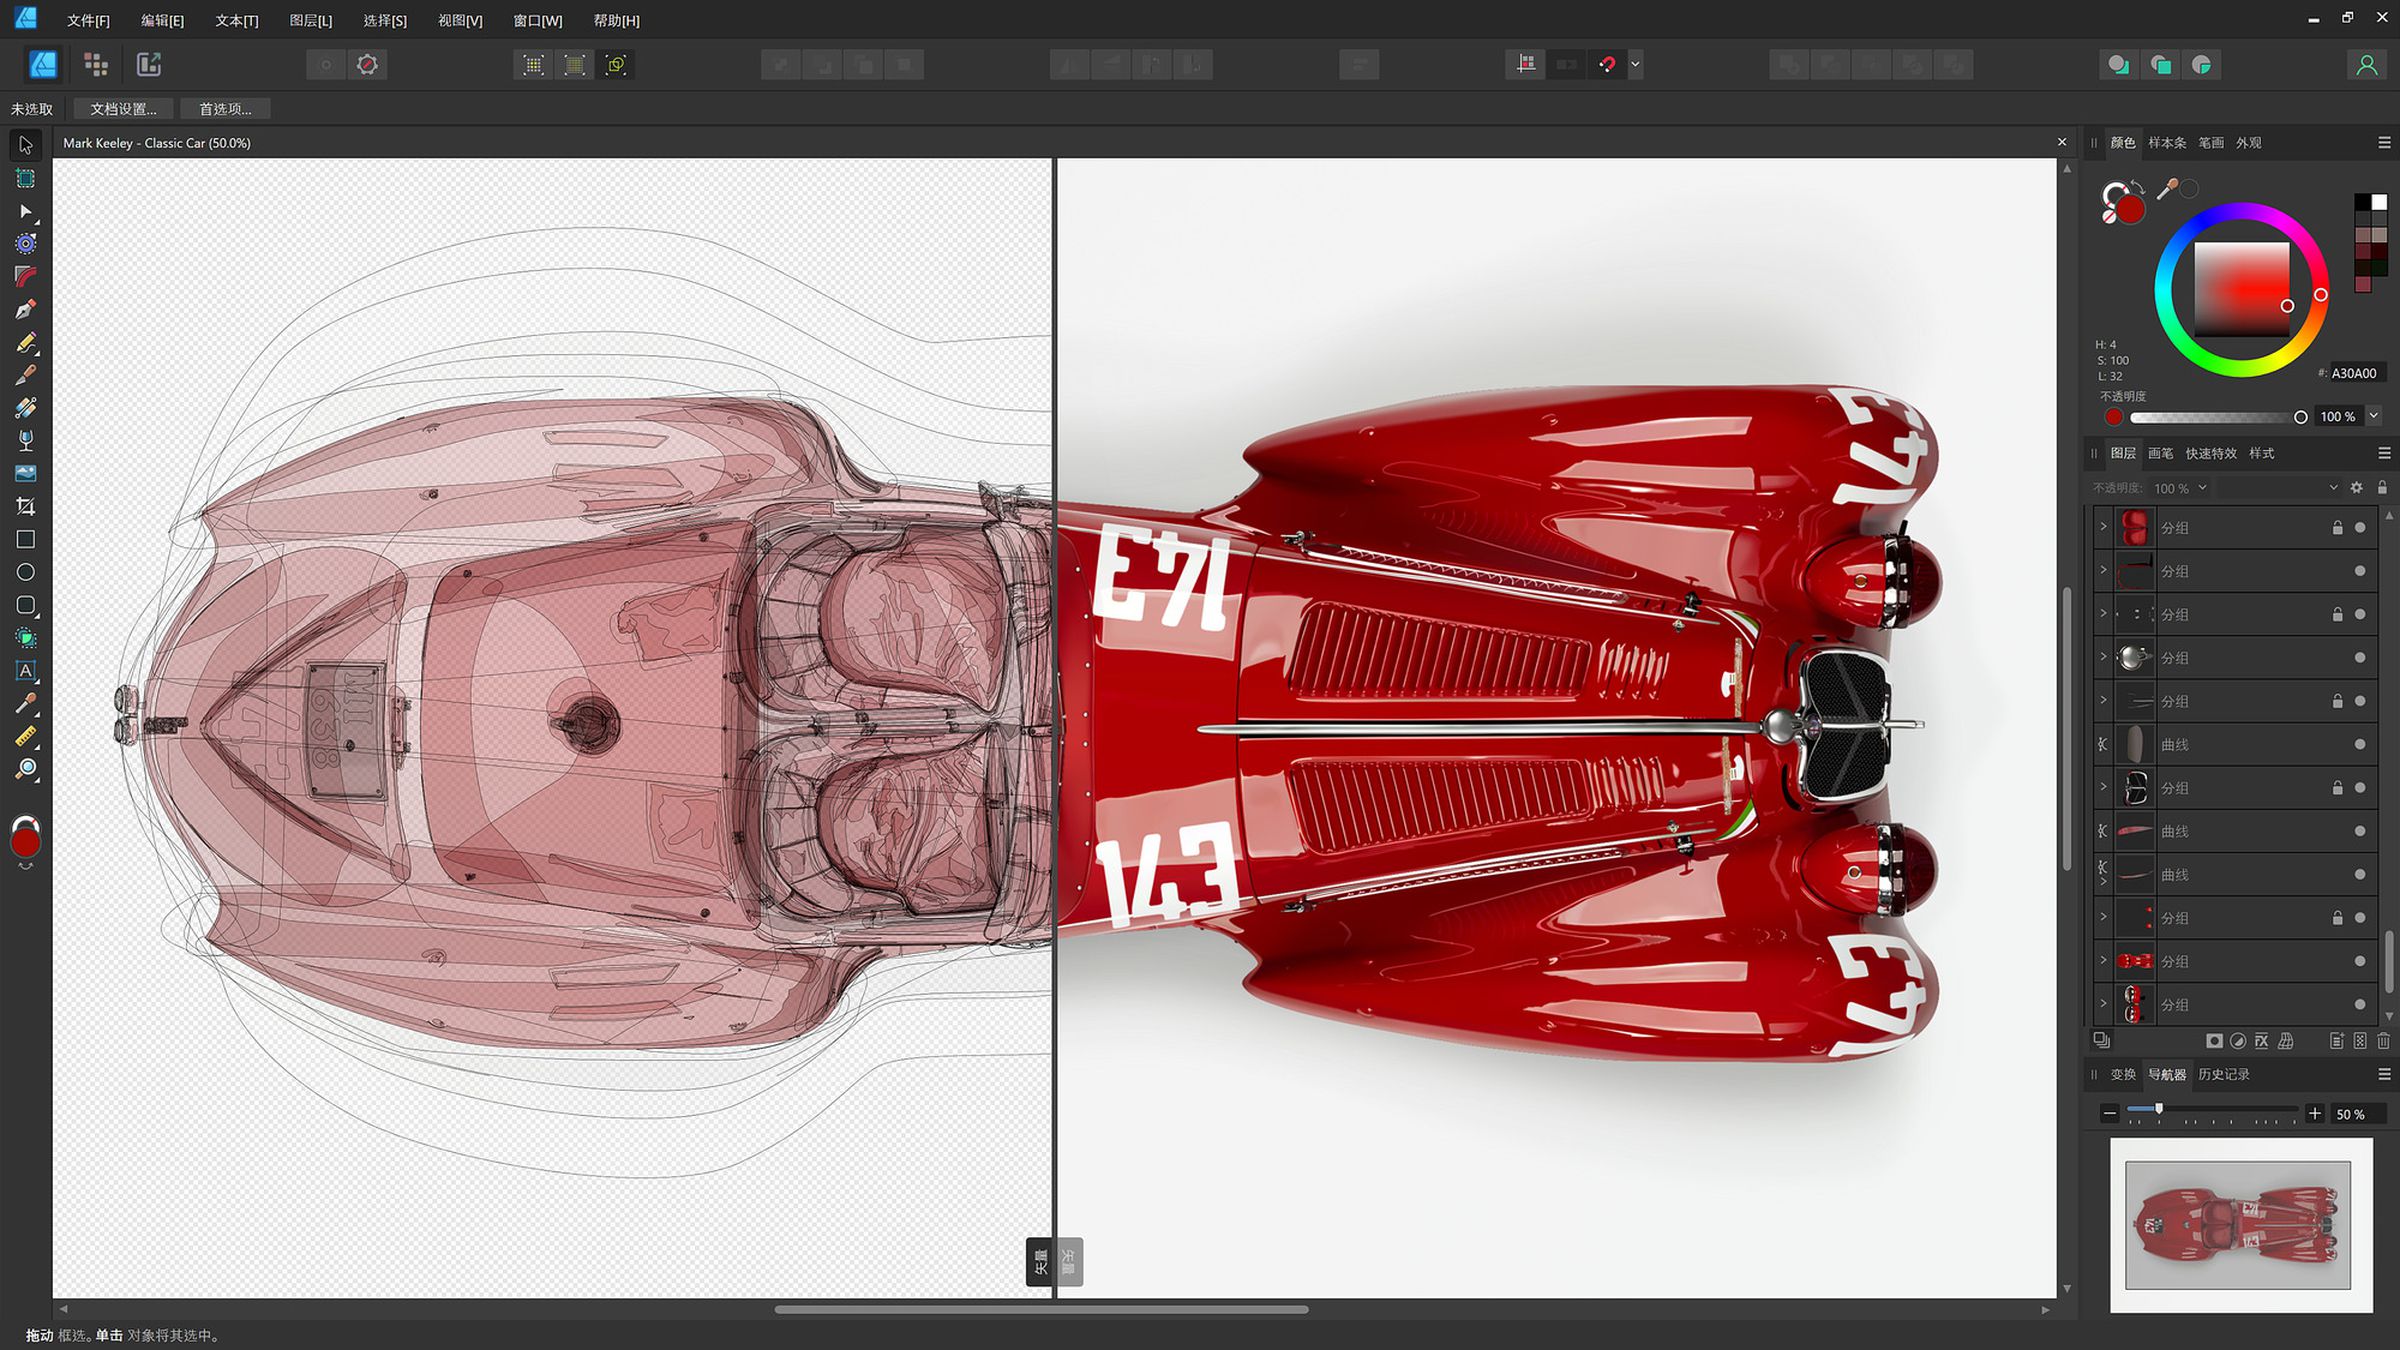 A screenshot of Affinity Design V2 demonstrating its new X-ray feature on a classic red racing car.